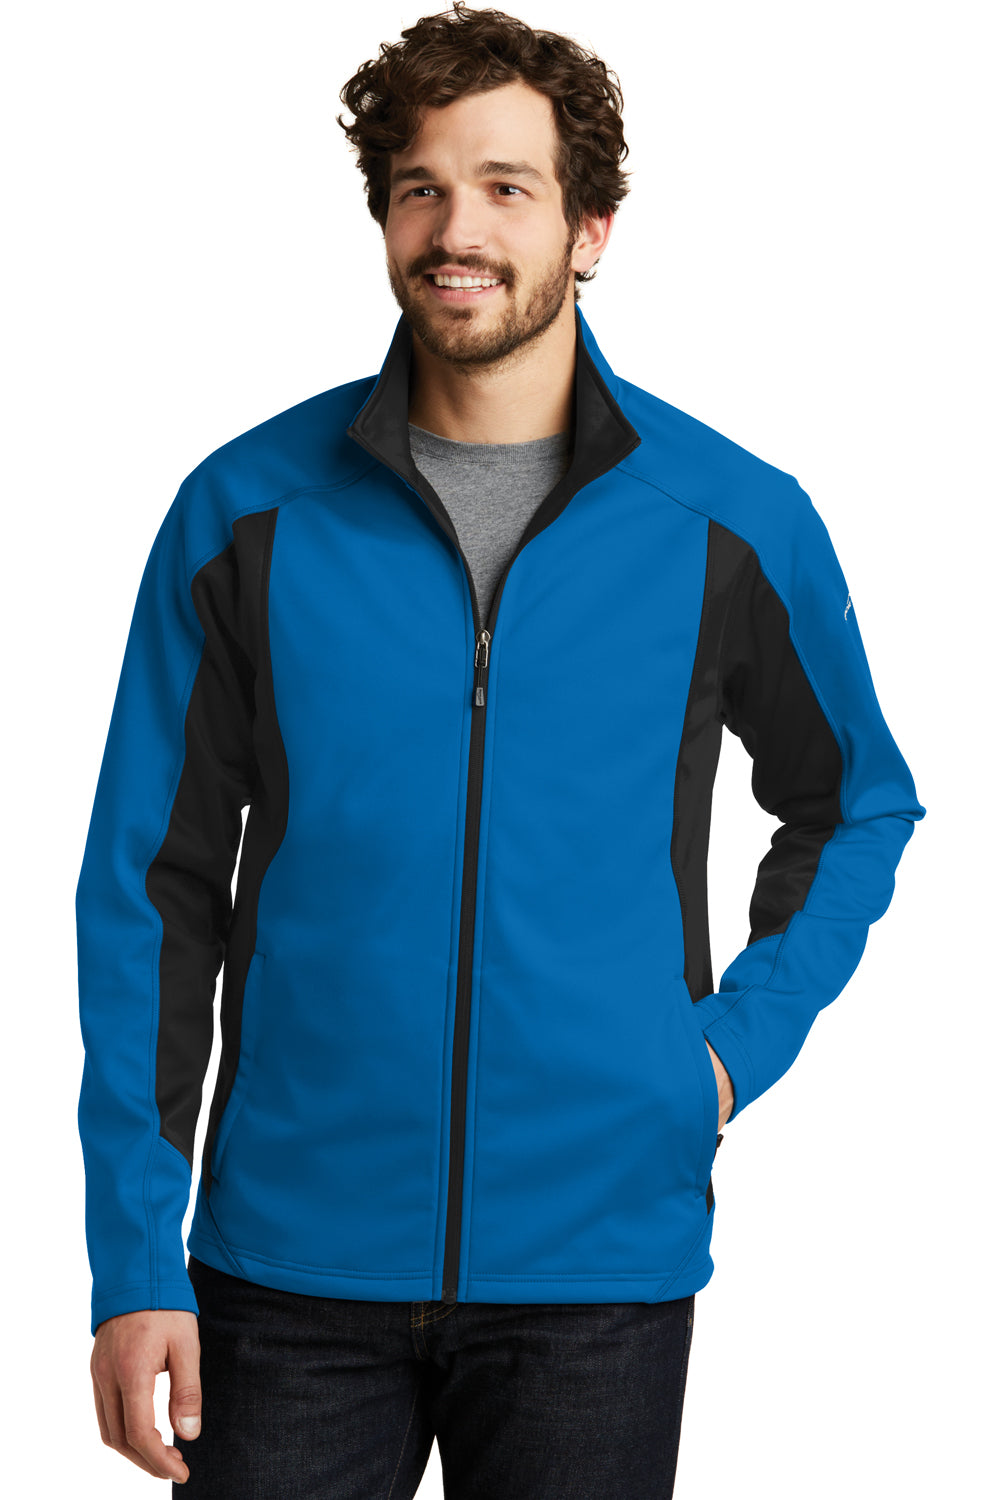 Eddie Bauer EB542 Mens Trail Water Resistant Full Zip Jacket Expedition Blue/Black Front